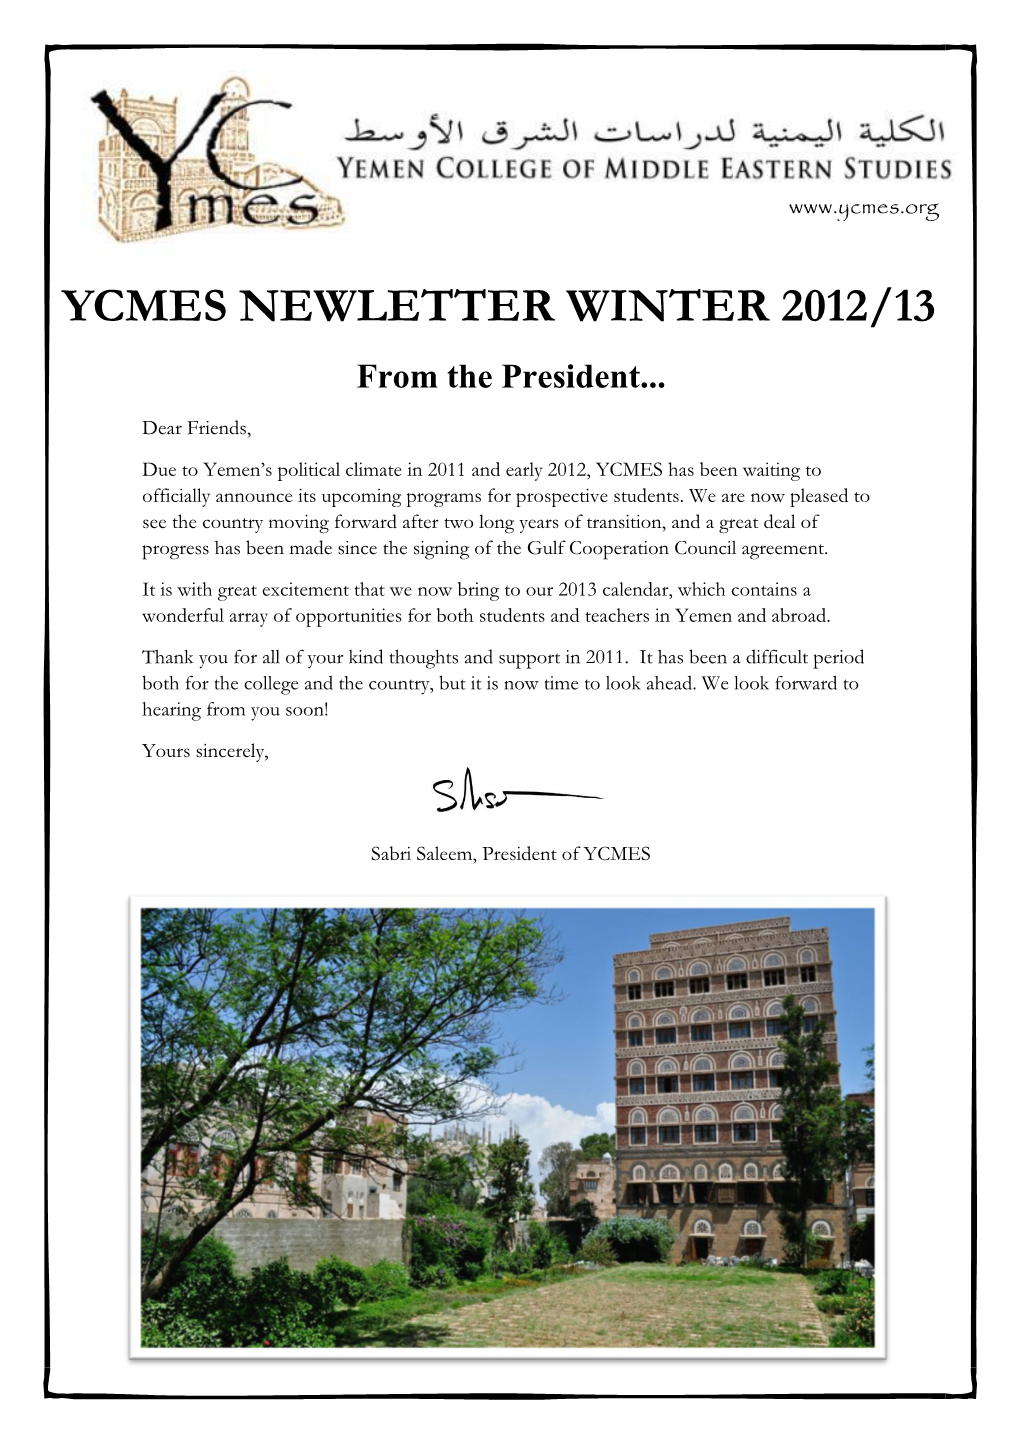 YCMES NEWLETTER WINTER 2012/13 from the President